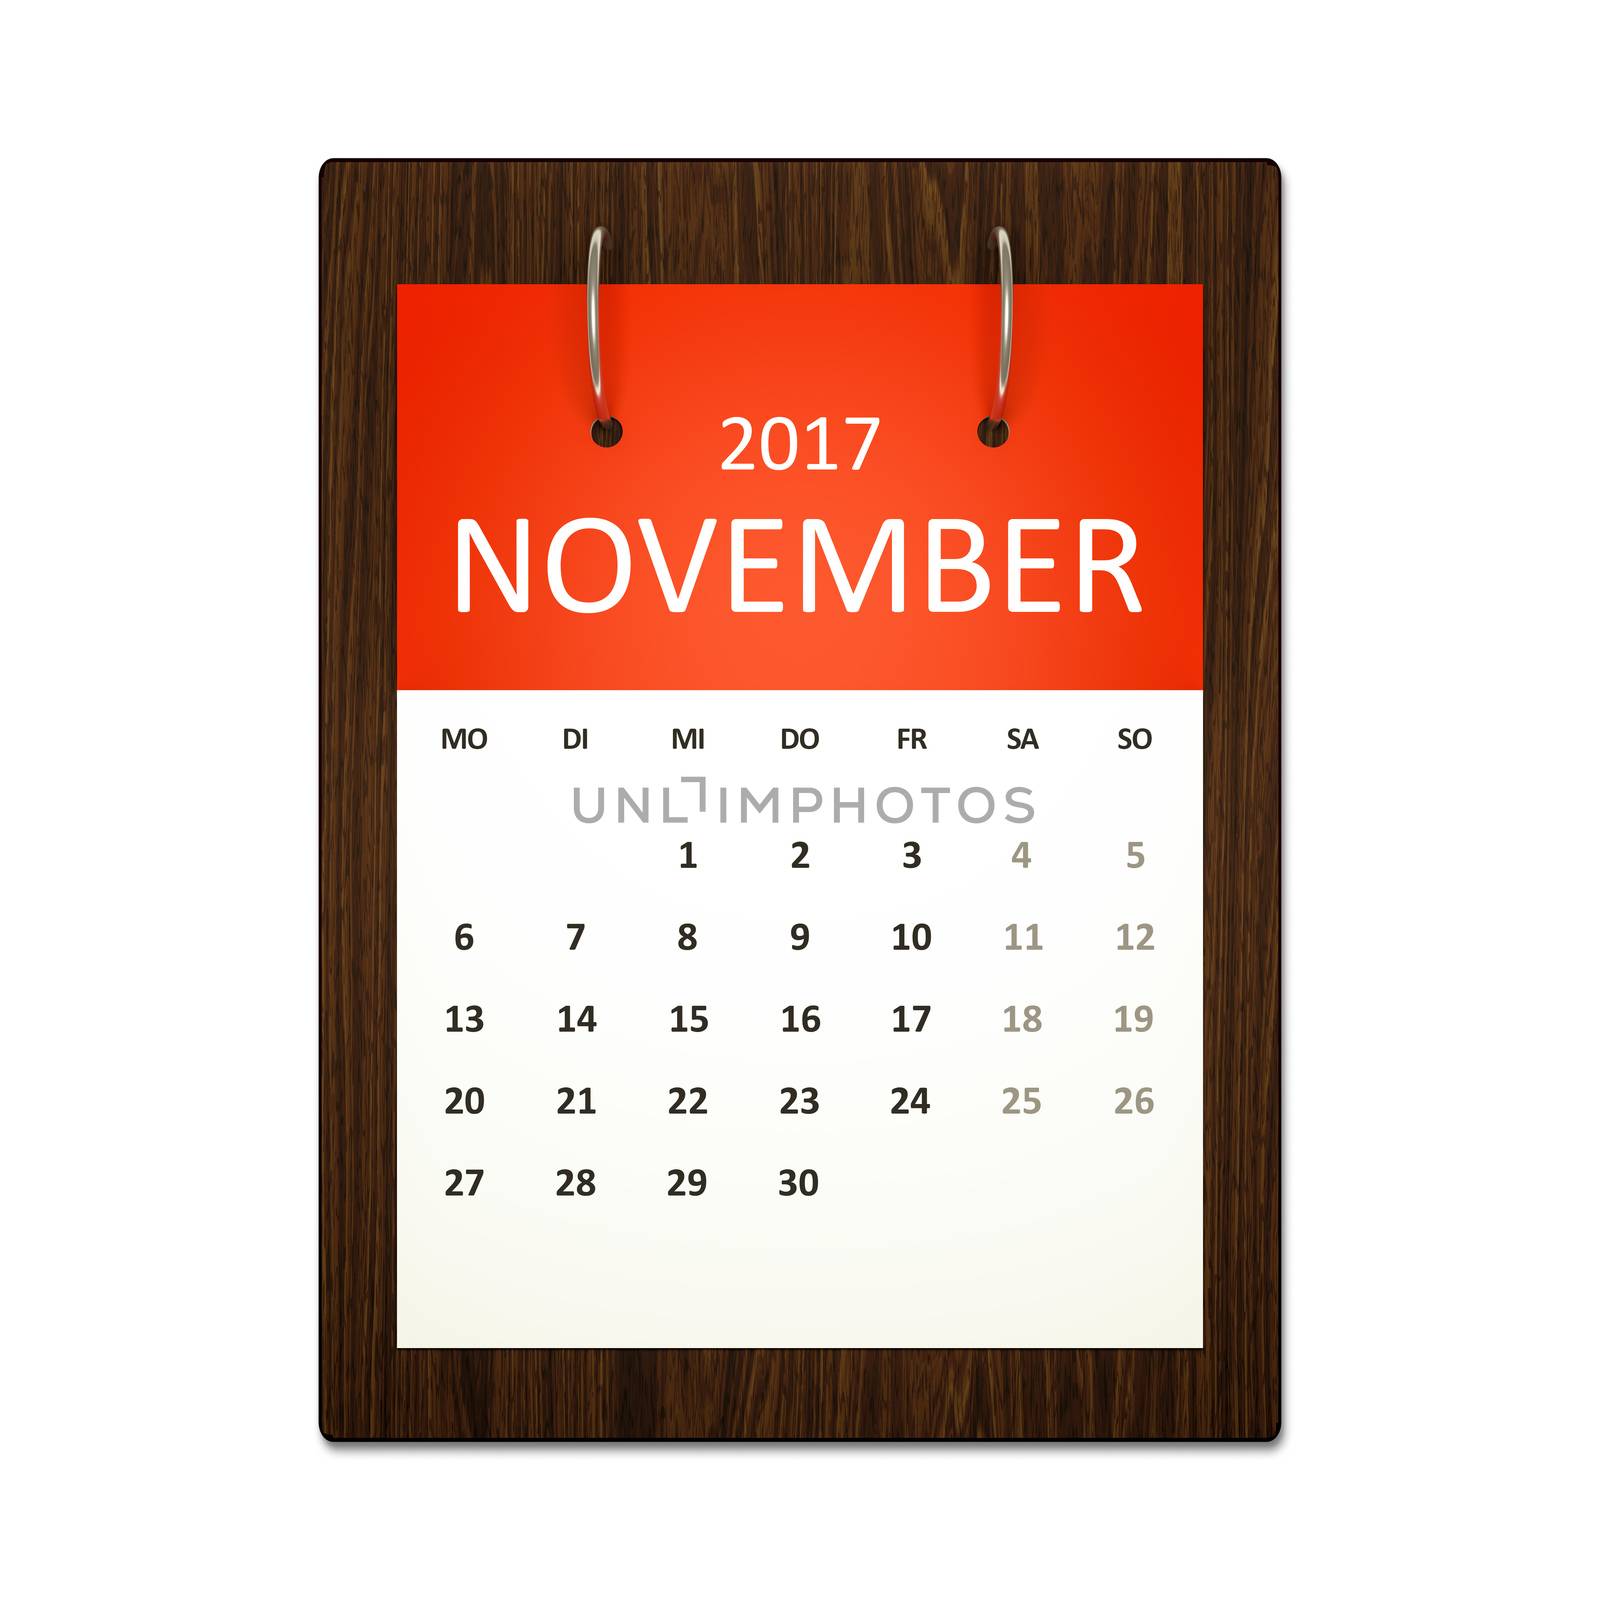 An image of a german calendar for event planning 2017 november